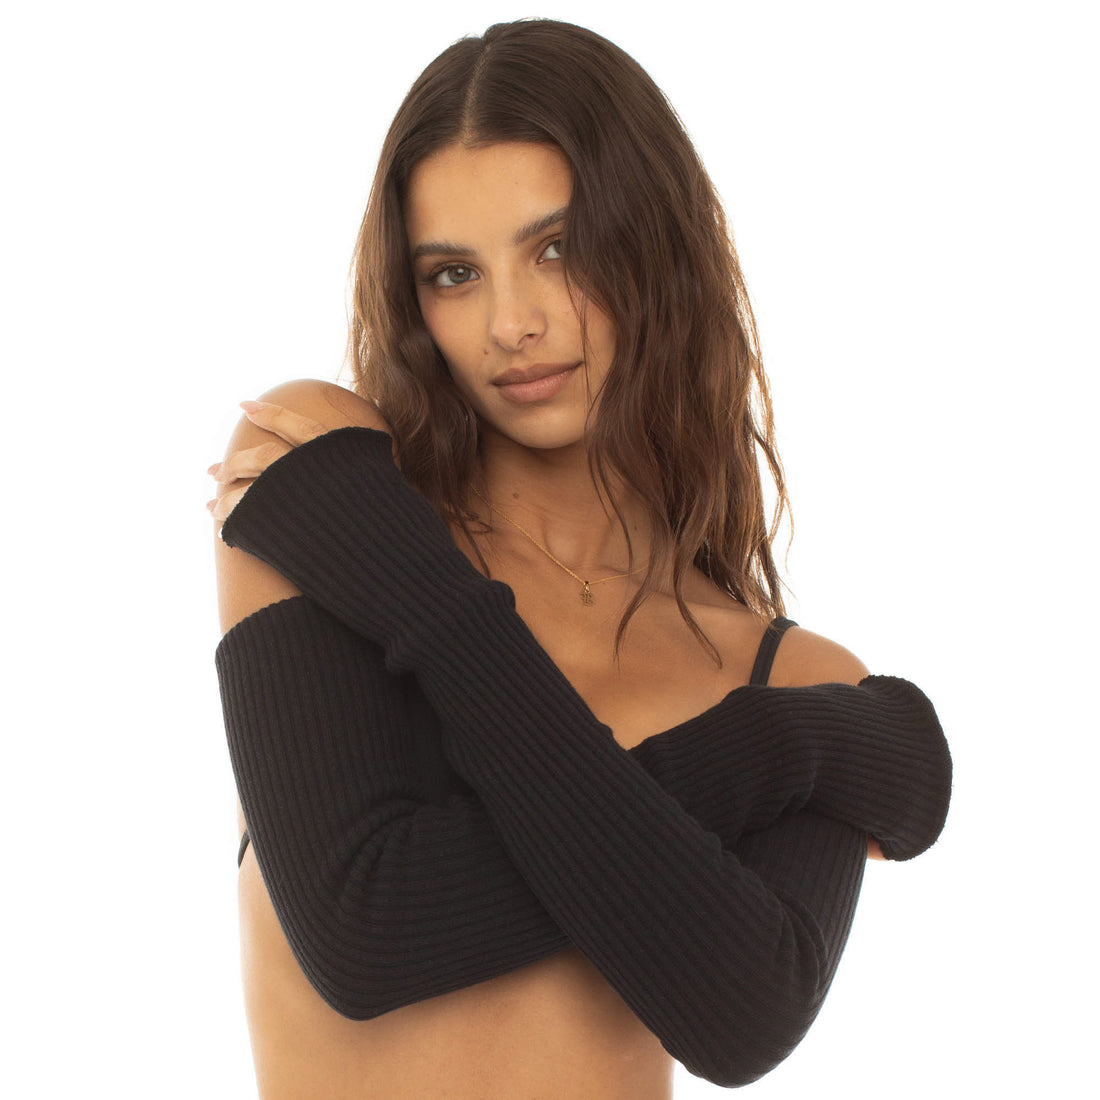 Are You Am I - Lune Arm Warmer**black